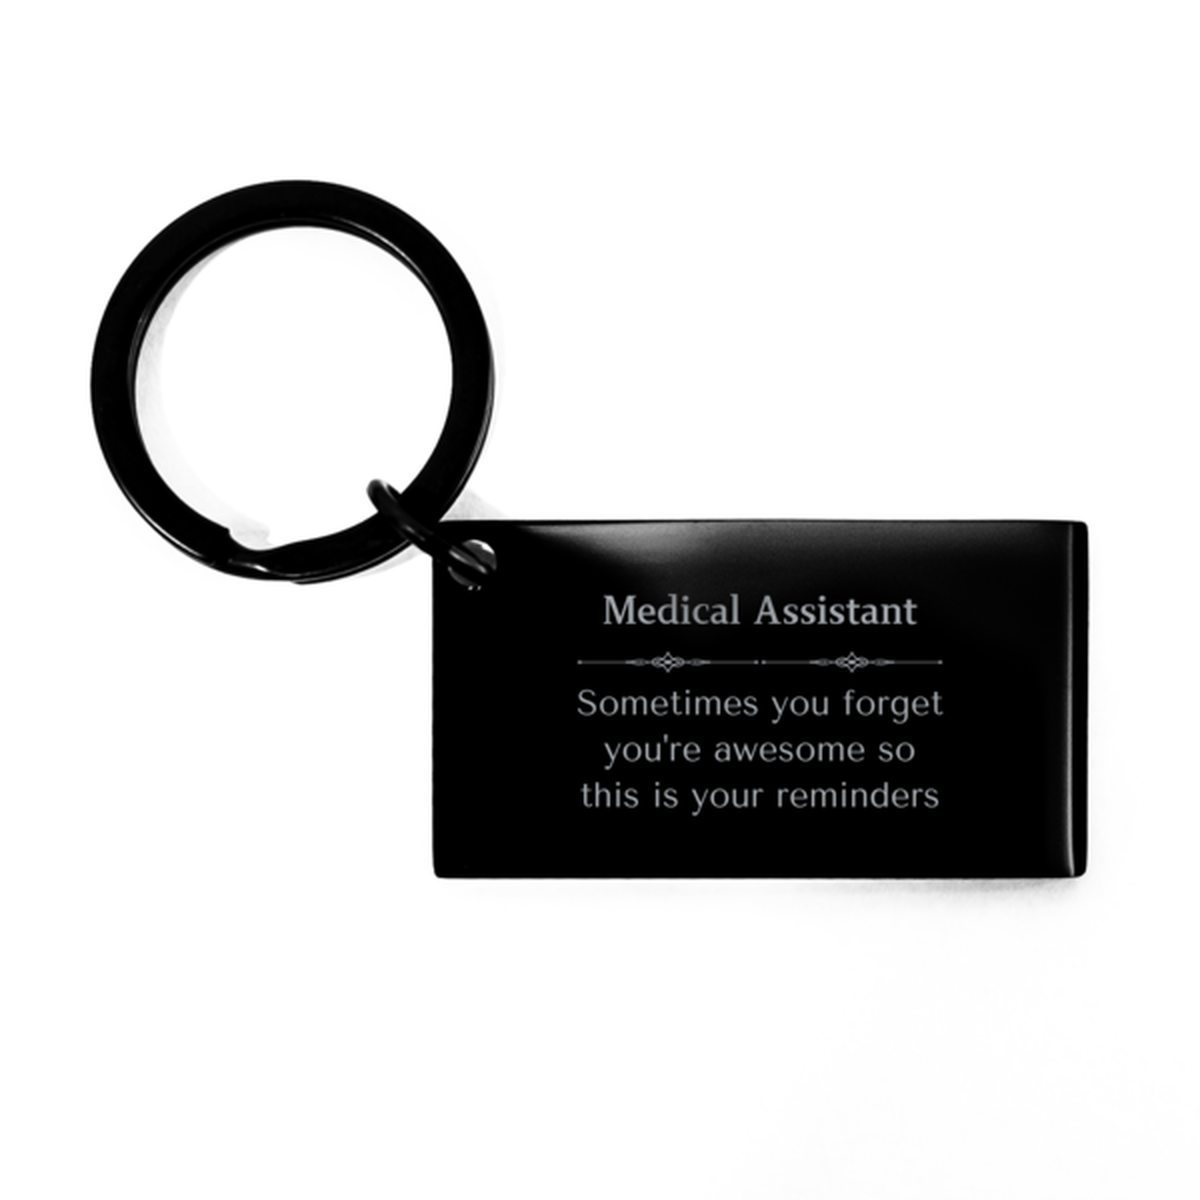 Sentimental Medical Assistant Keychain, Operator Sometimes you forget you're awesome so this is your reminders, Graduation Christmas Birthday Gifts for Medical Assistant, Men, Women, Coworkers